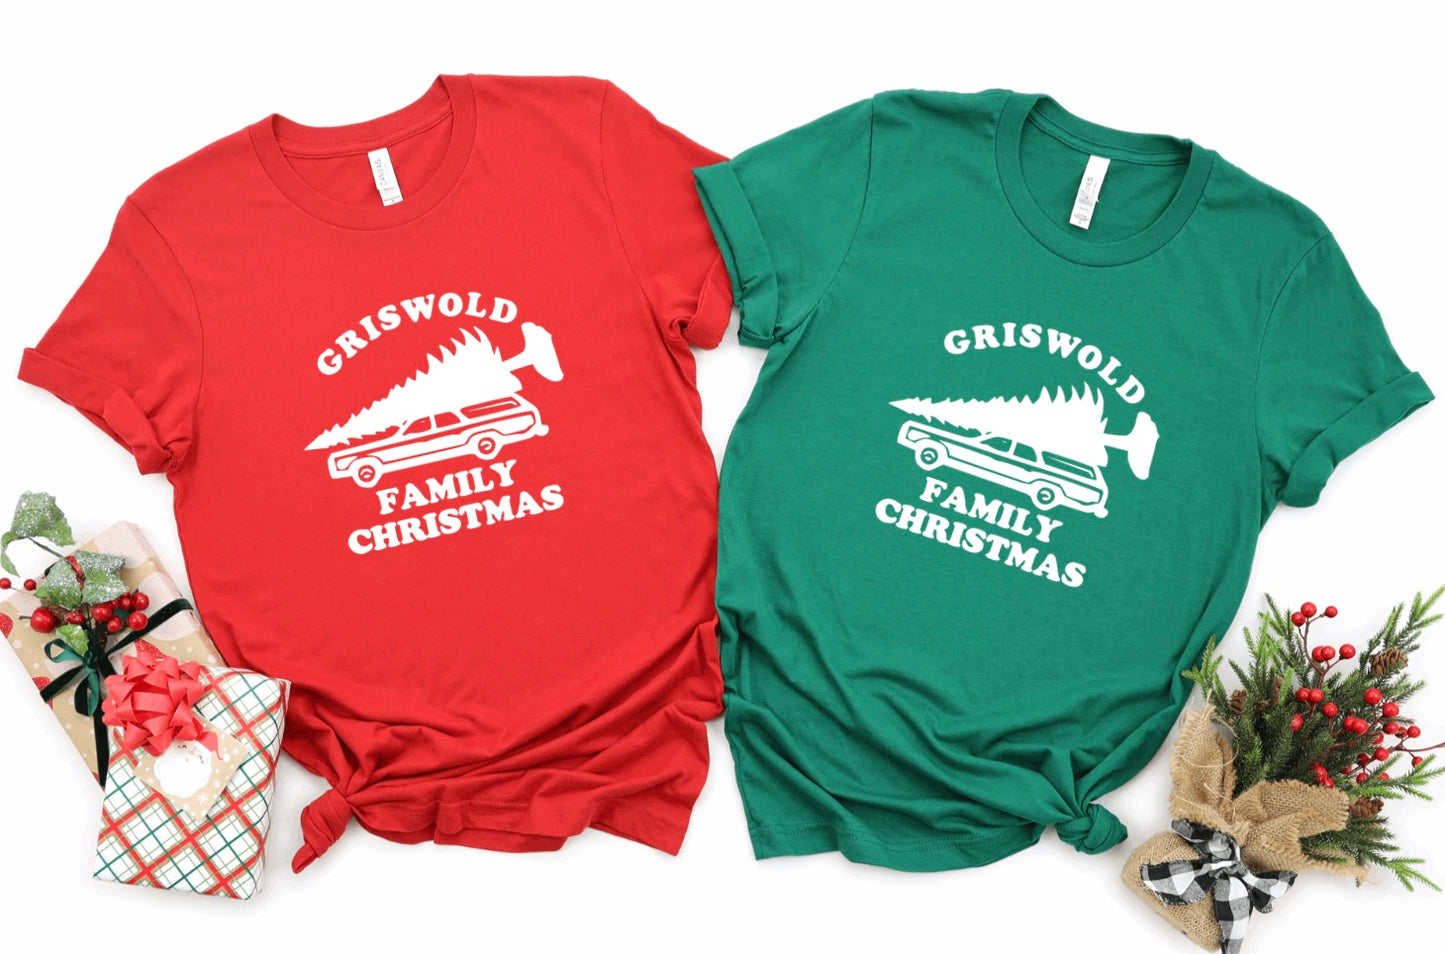 Griswold family Christmas t-shirt 